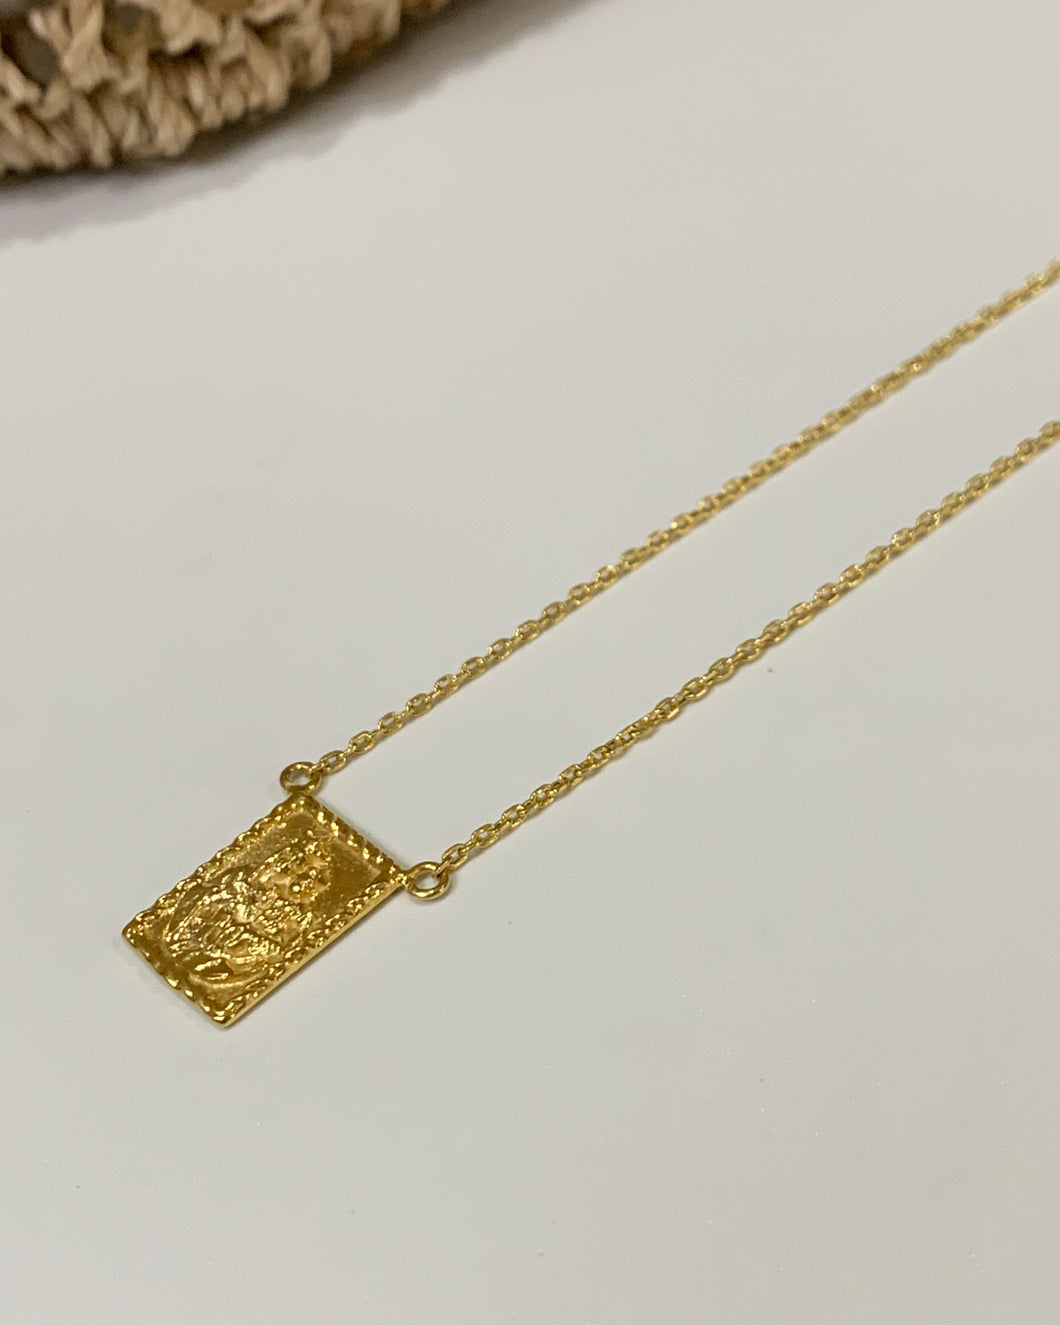 A gold rectangular scapular on a gold cable chain.